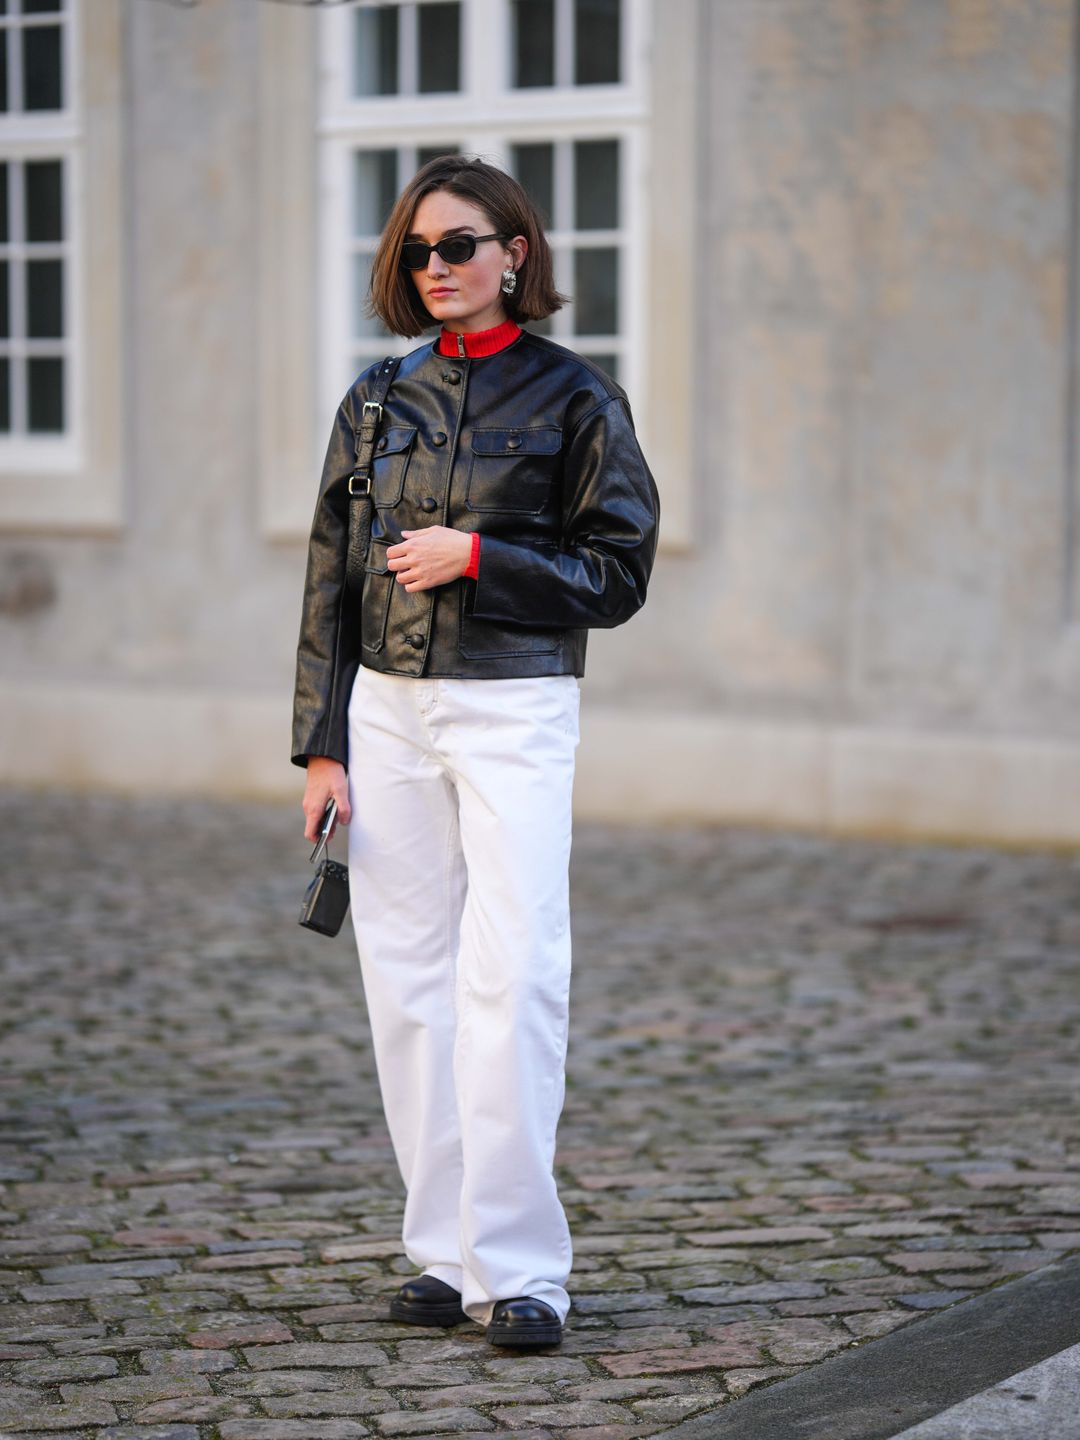 Fashion week guest wearing white jeans with a black leather jacket 